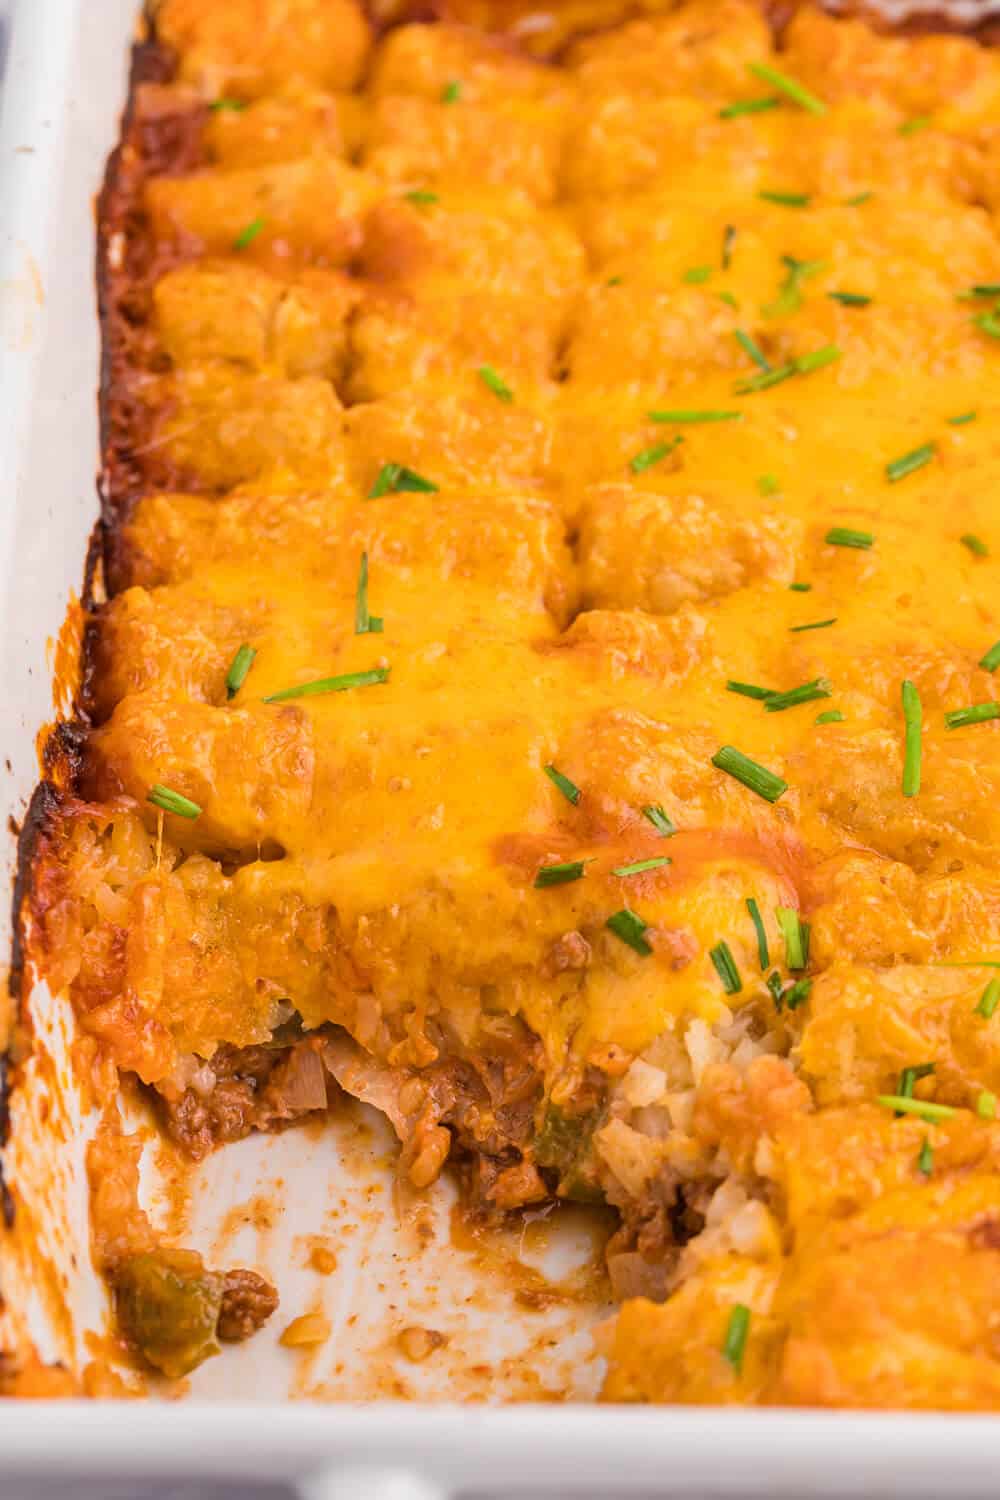 Sloppy Joe Tater Tot Casserole in a casserole dish with a serving removed.